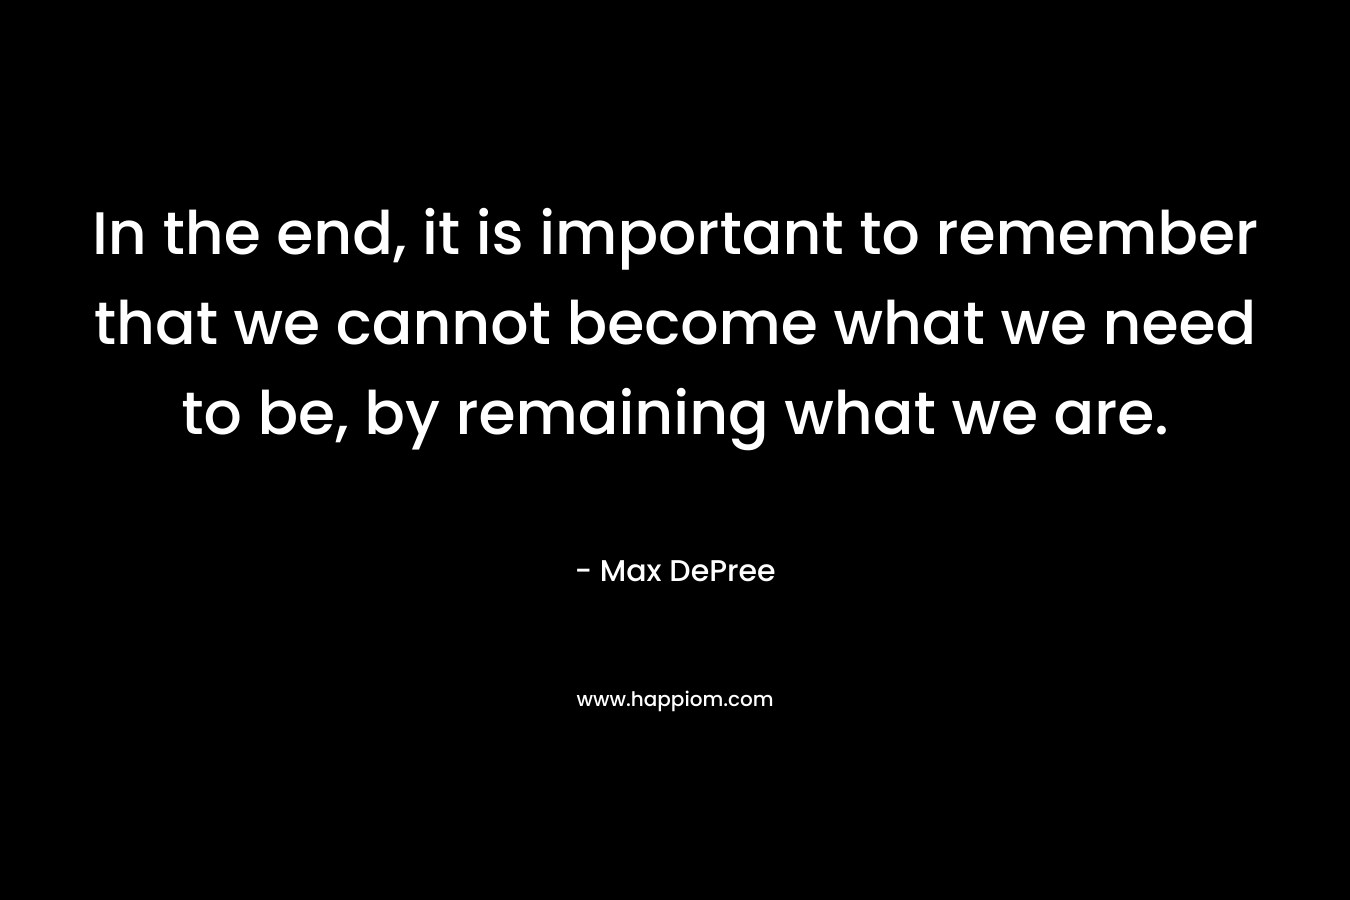 In the end, it is important to remember that we cannot become what we need to be, by remaining what we are.